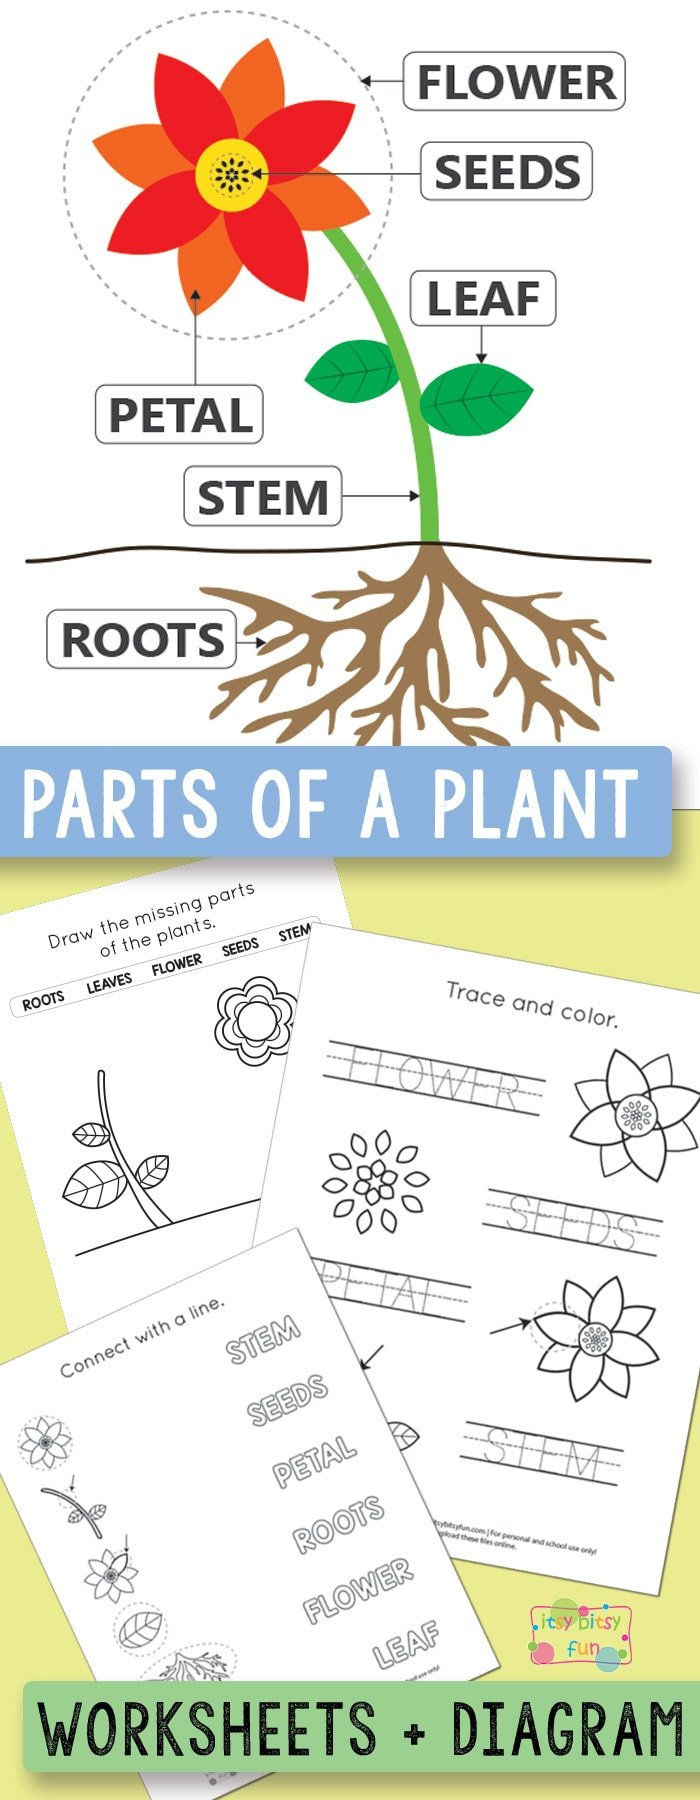 Free Printable Parts Of A Plant Worksheets  Itsy Bitsy Fun Within Plant Worksheets For Kindergarten